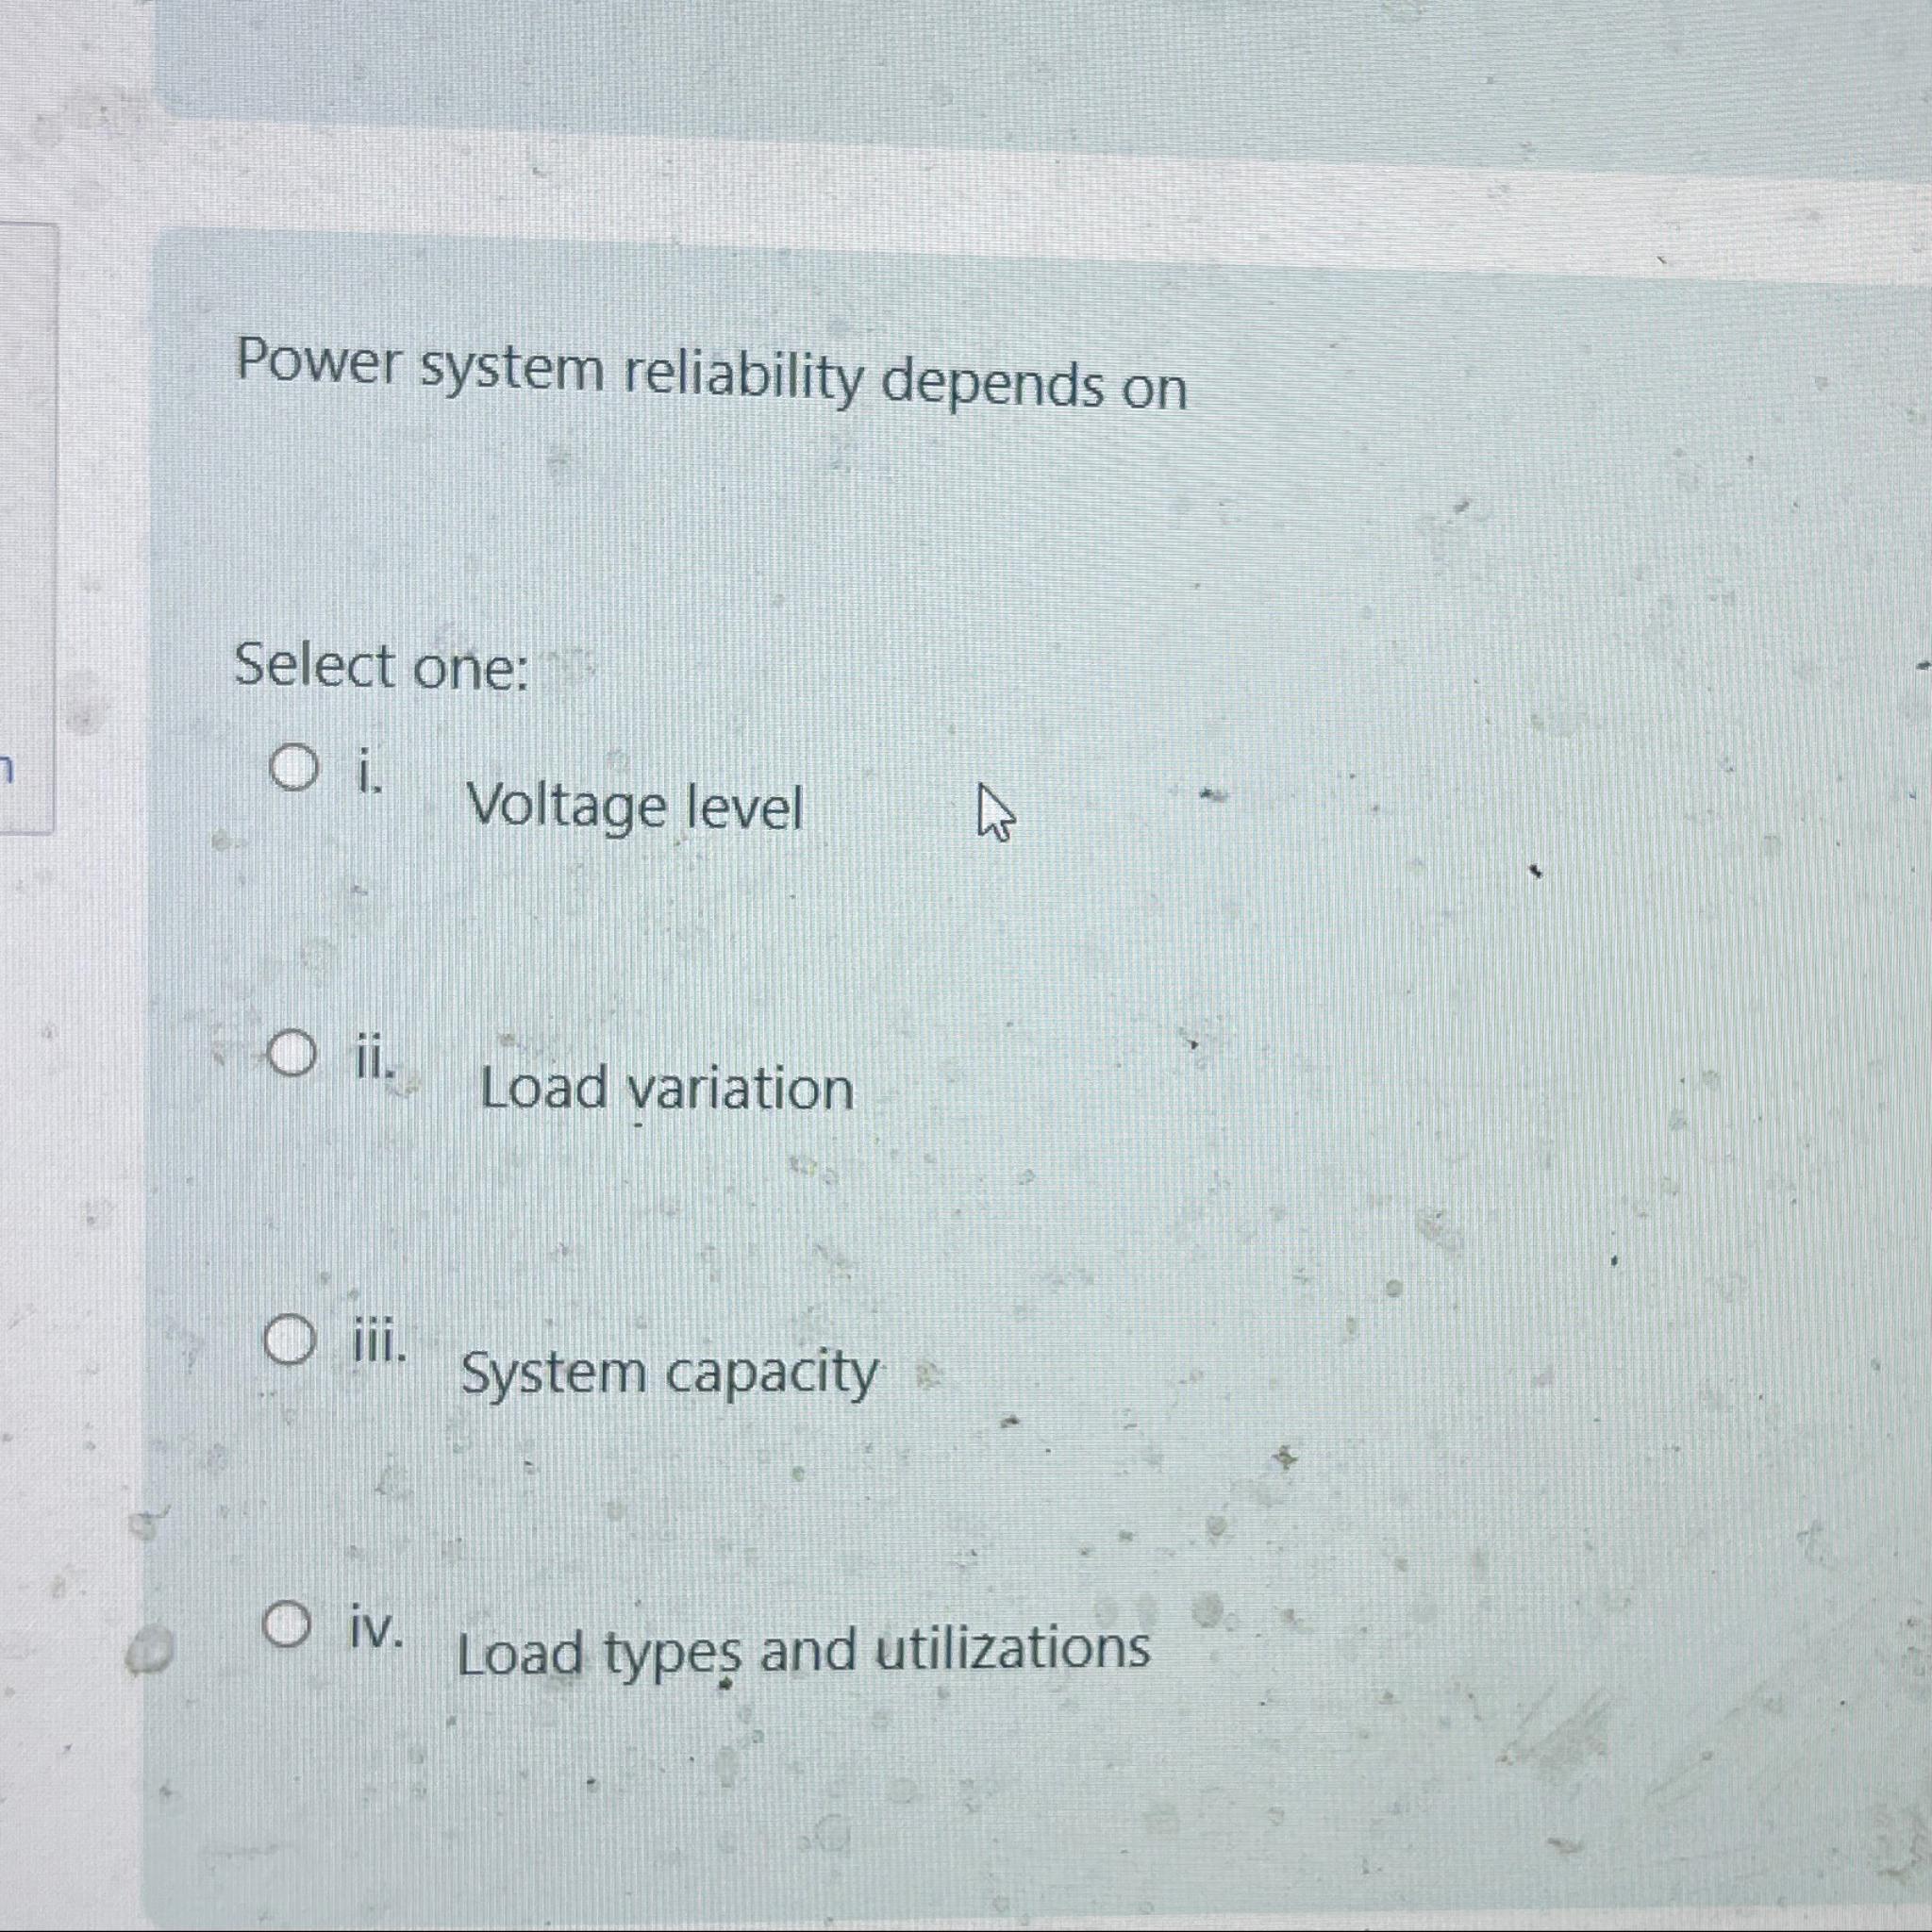 7 Power system reliability depends on Select one: Oi. O ii. Oiii. iv. Voltage level Load variation System